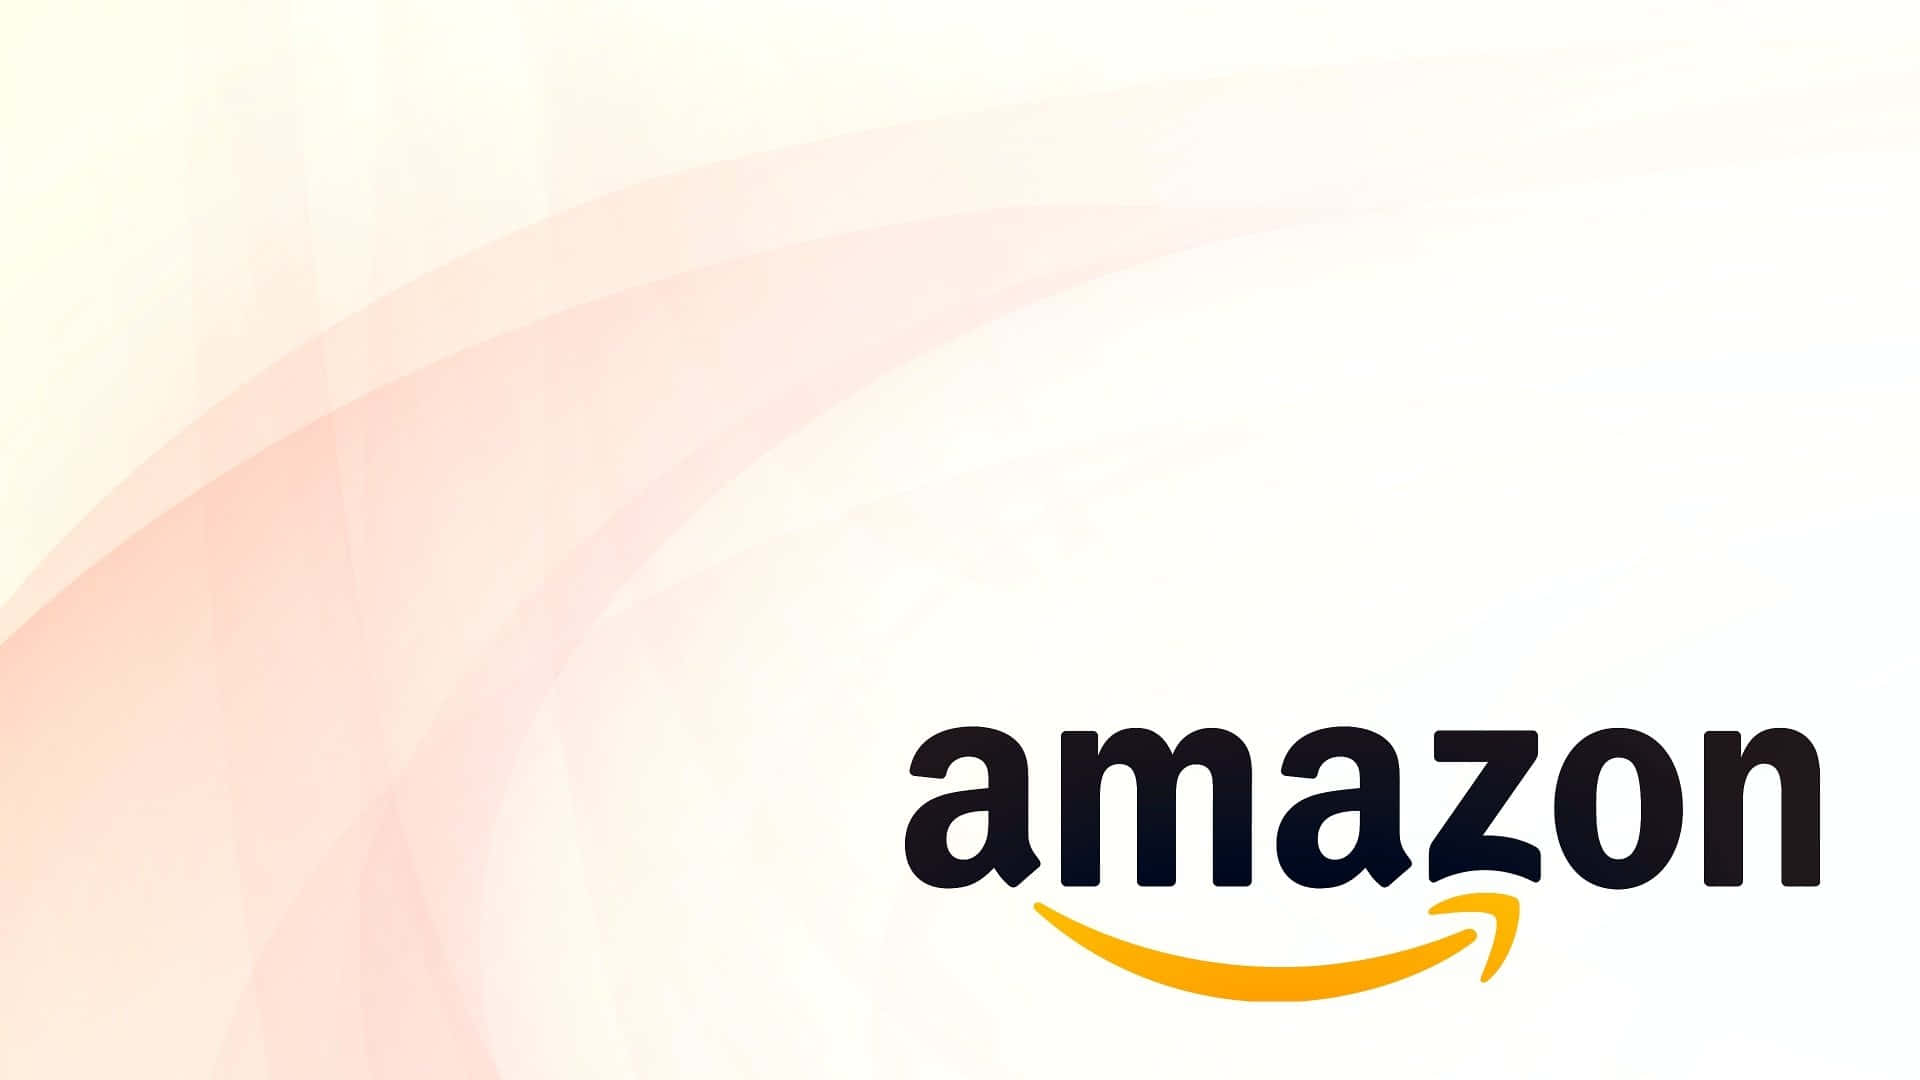 Discover endless possibilities with Amazon